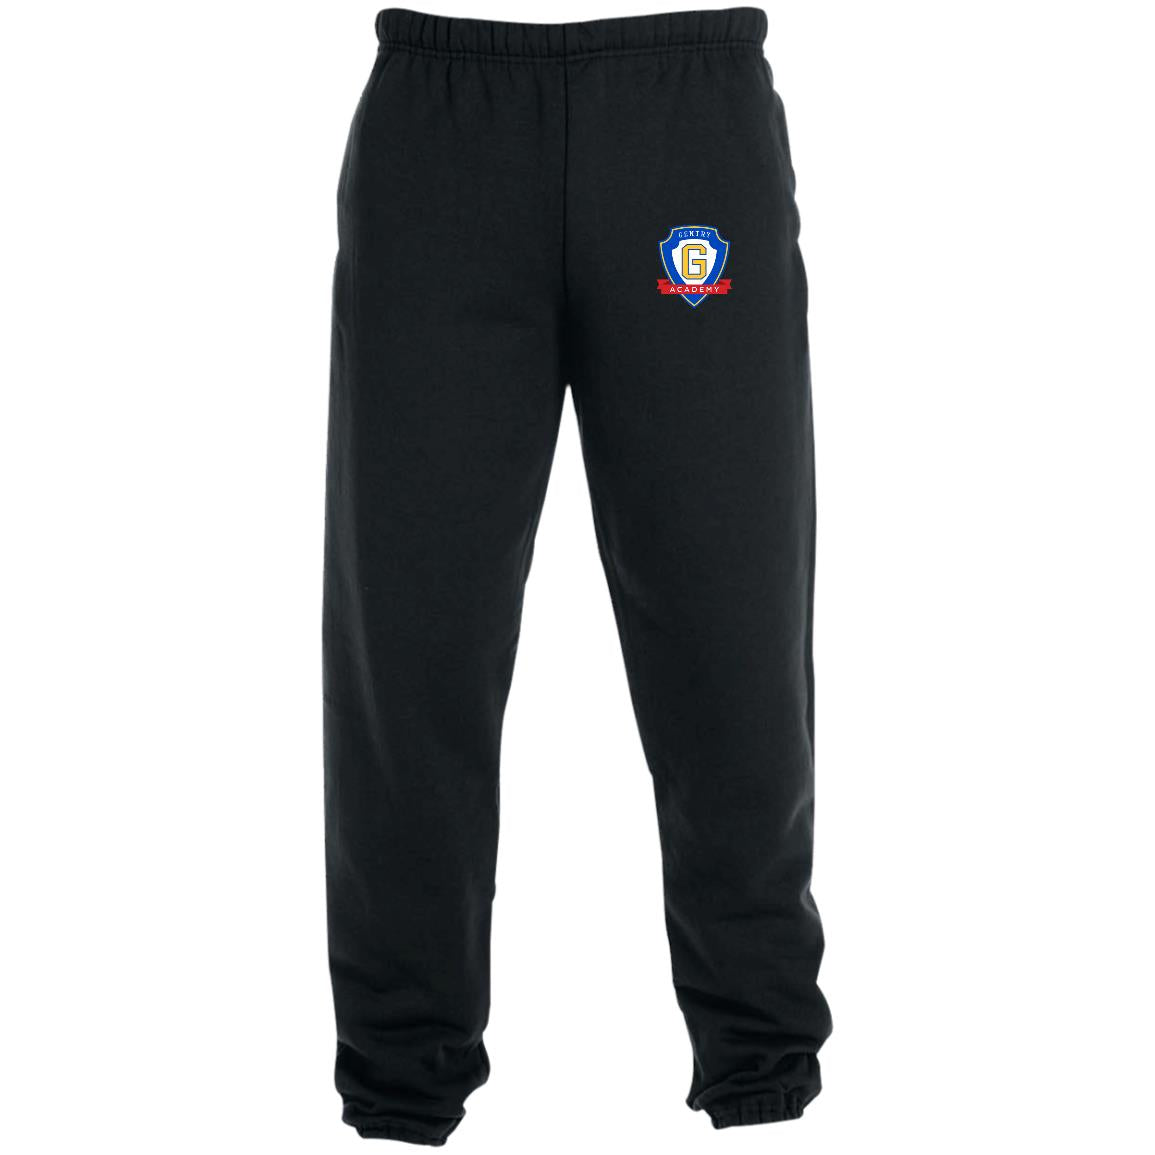 Gentry Shield Sweatpants with Pockets